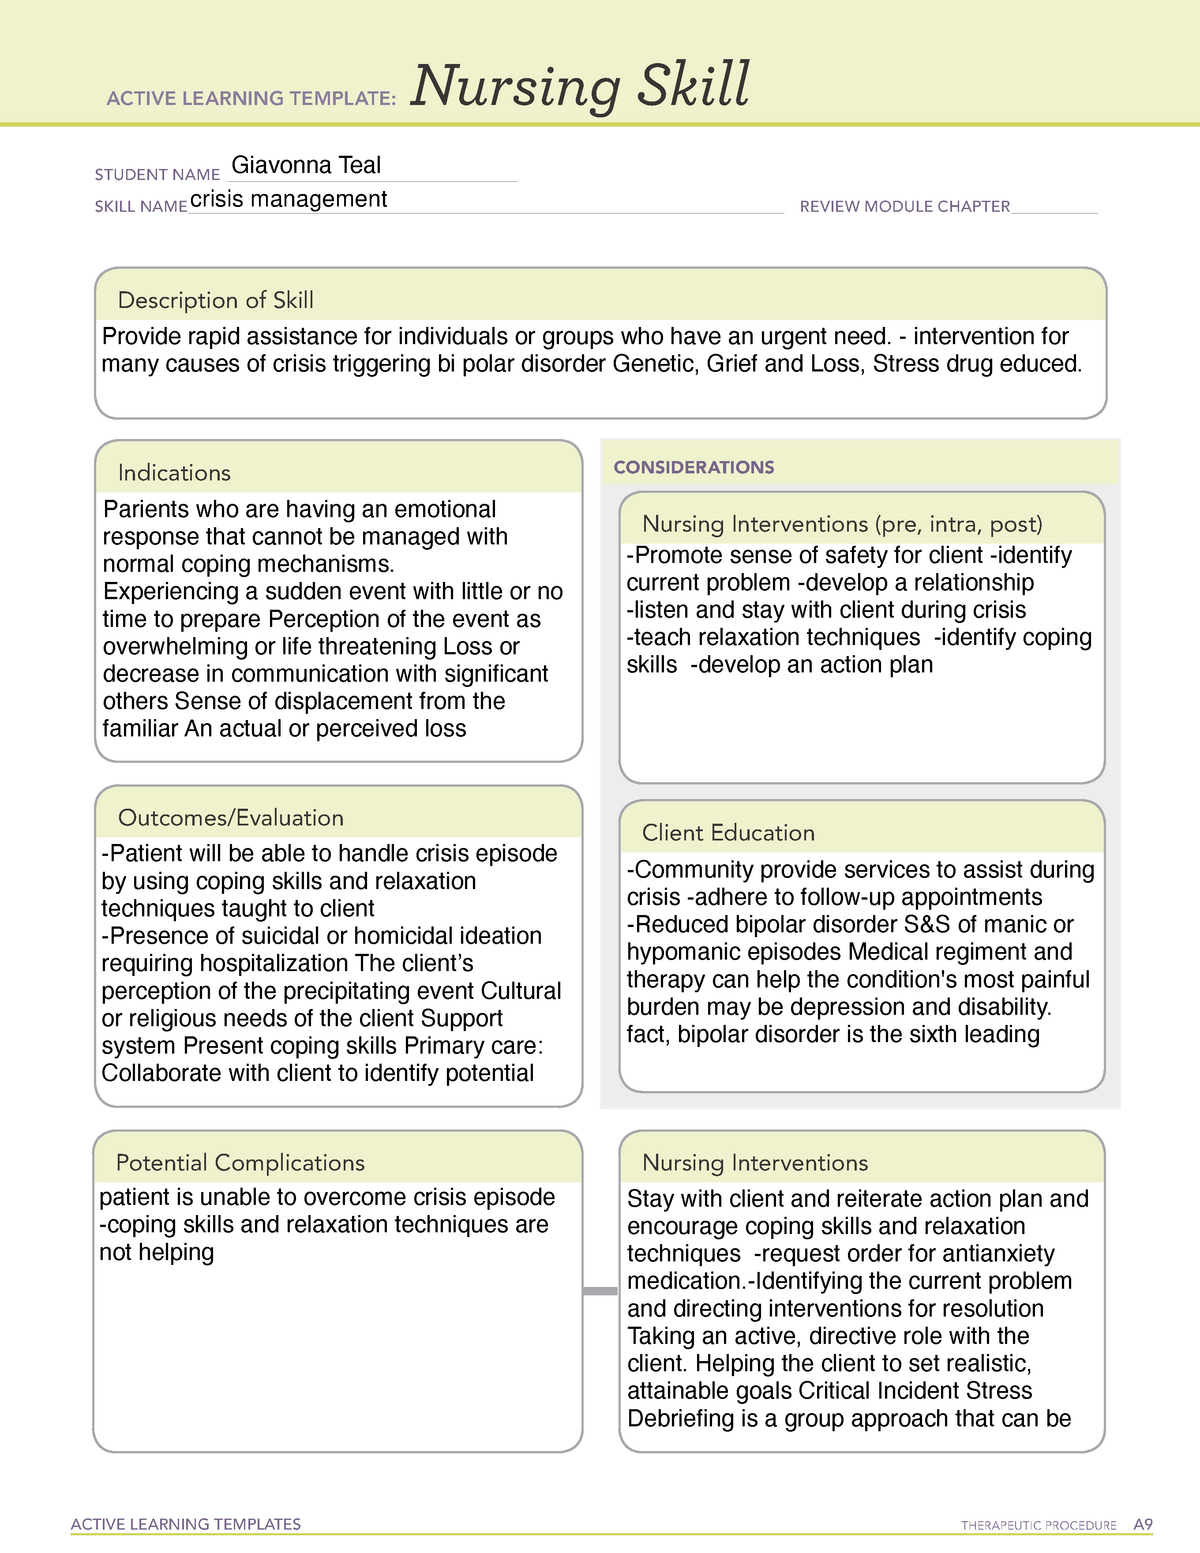 Crisis Management - ATI - ACTIVE LEARNING TEMPLATES THERAPEUTIC ...